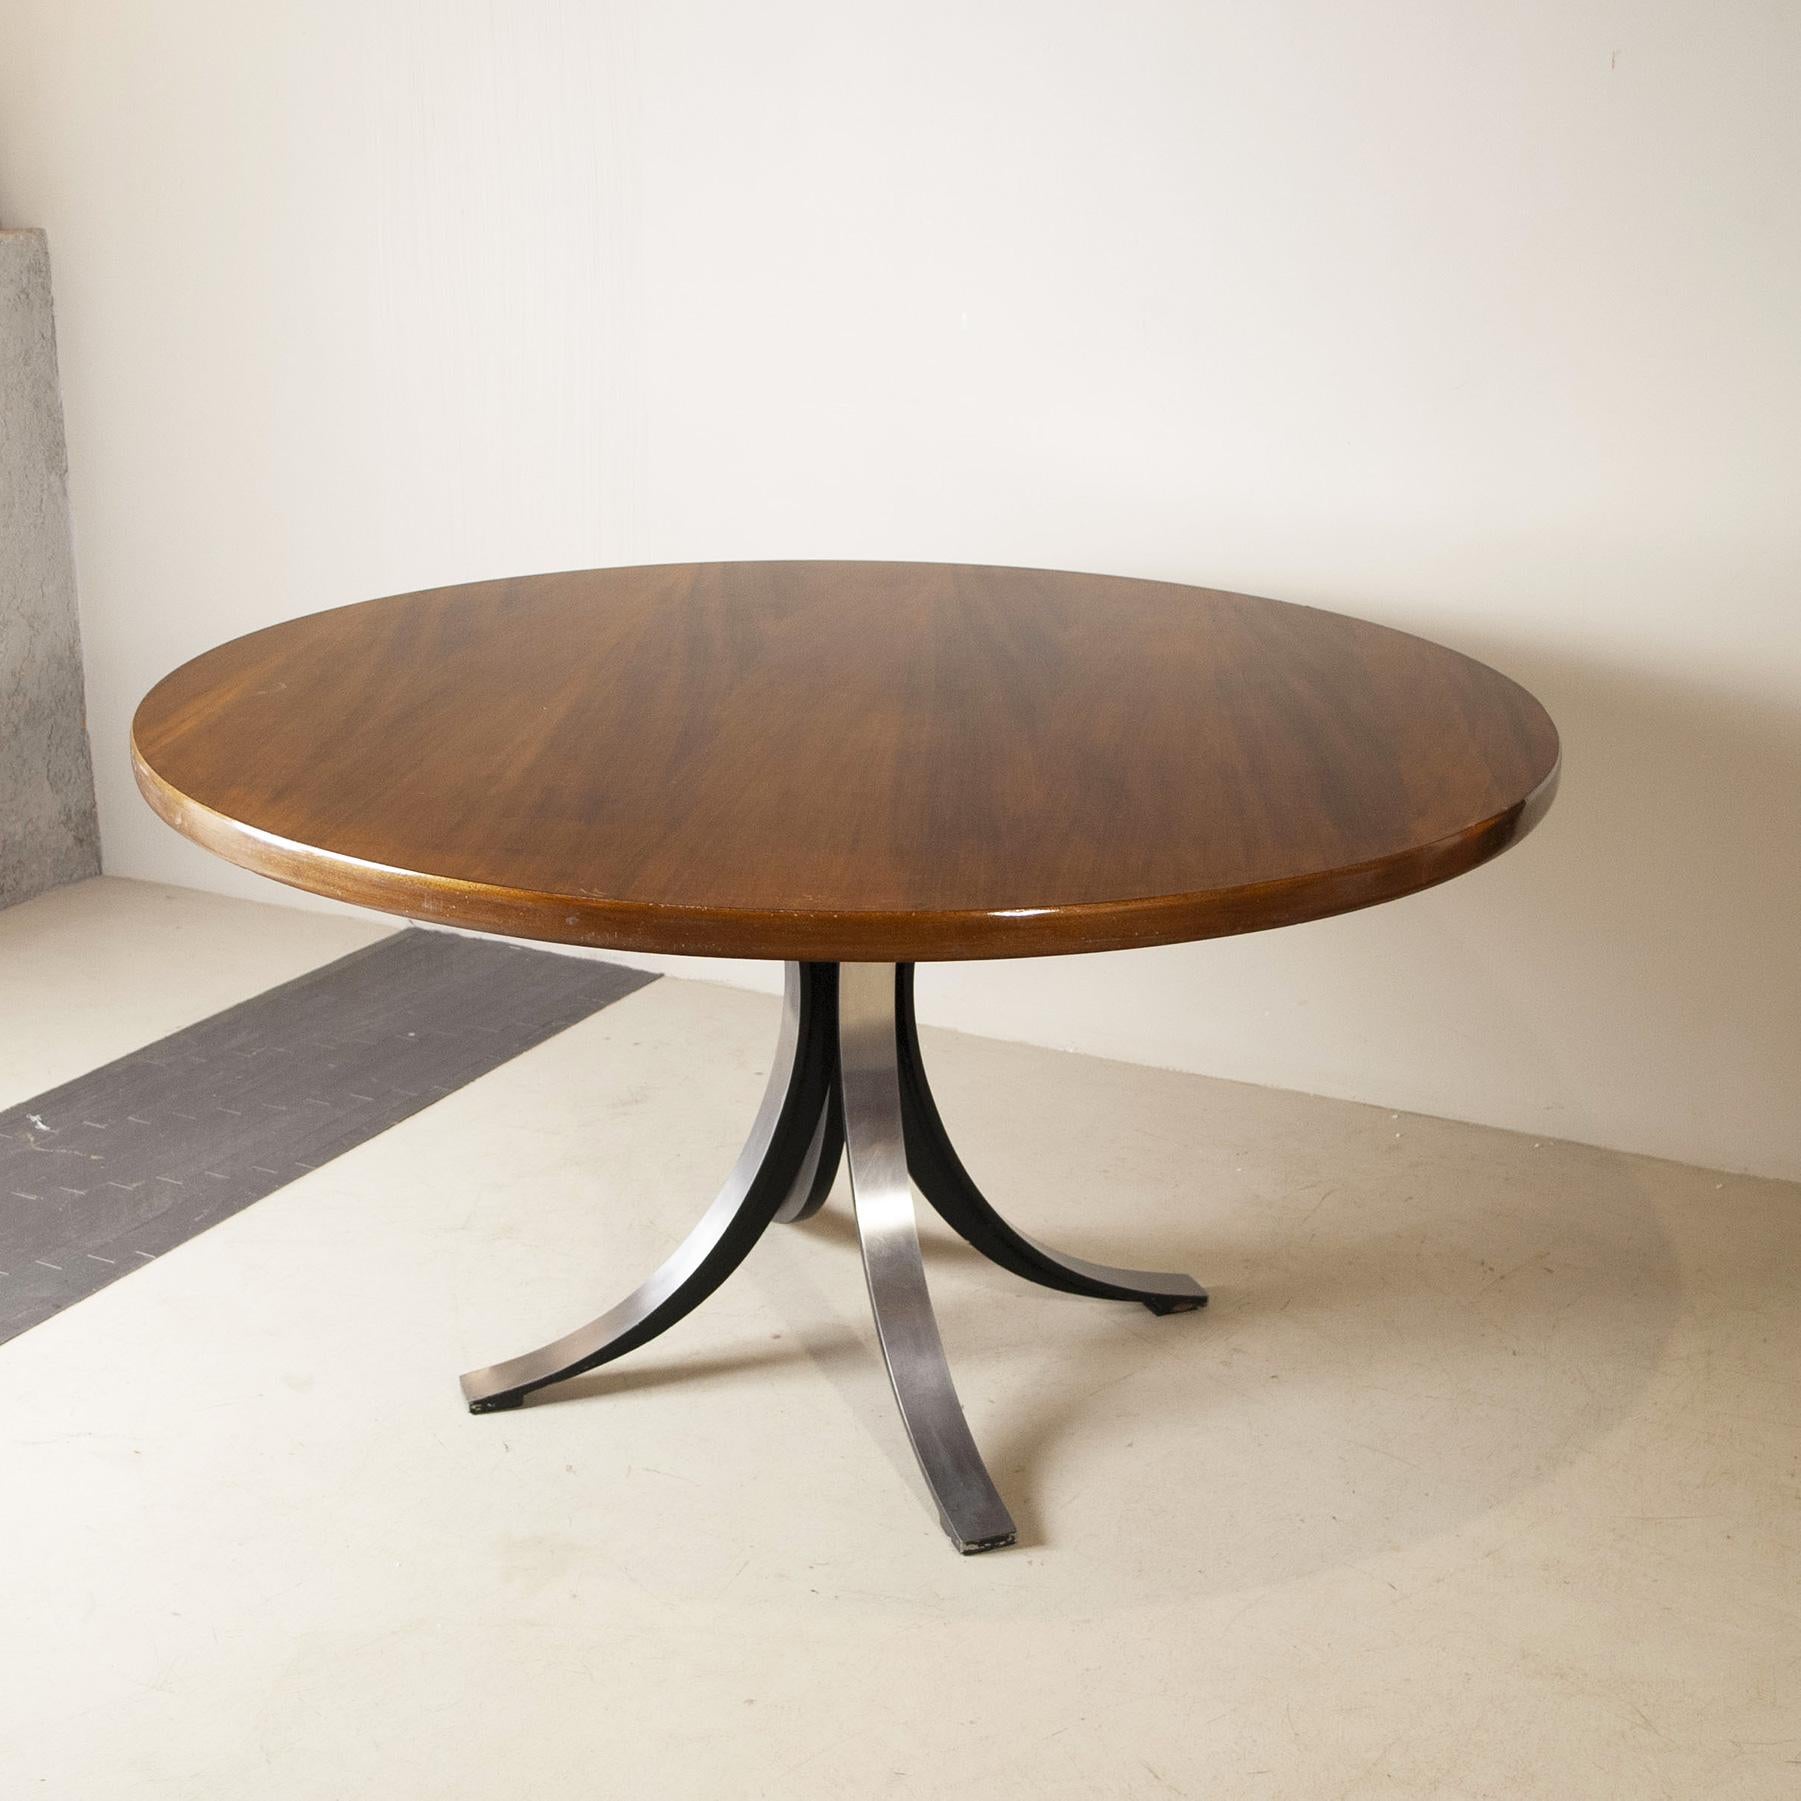 A classic of Italian design from the 1960s. Round table model T69 with wood top, rare, production Tecno designers Osvaldo Borsani & Eugenio Gerli. The particularity of T69 is the structural base that has a strong graphic character due to the